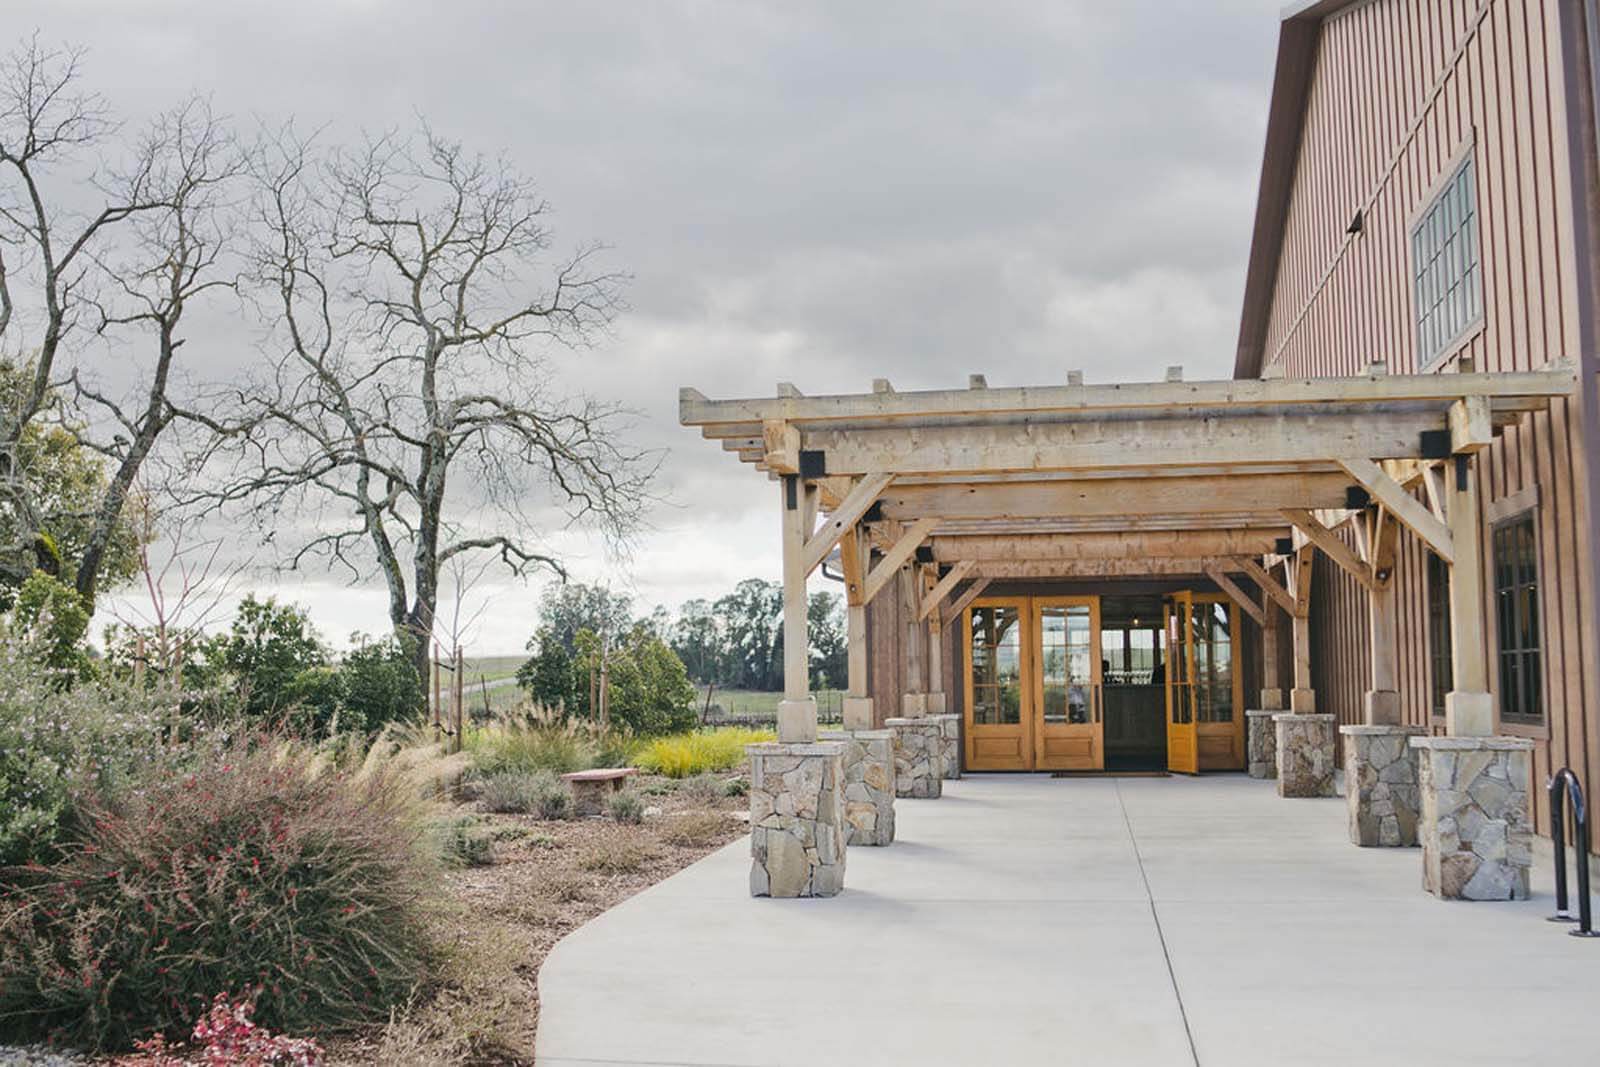 outdoor view of a winery barnlike structure